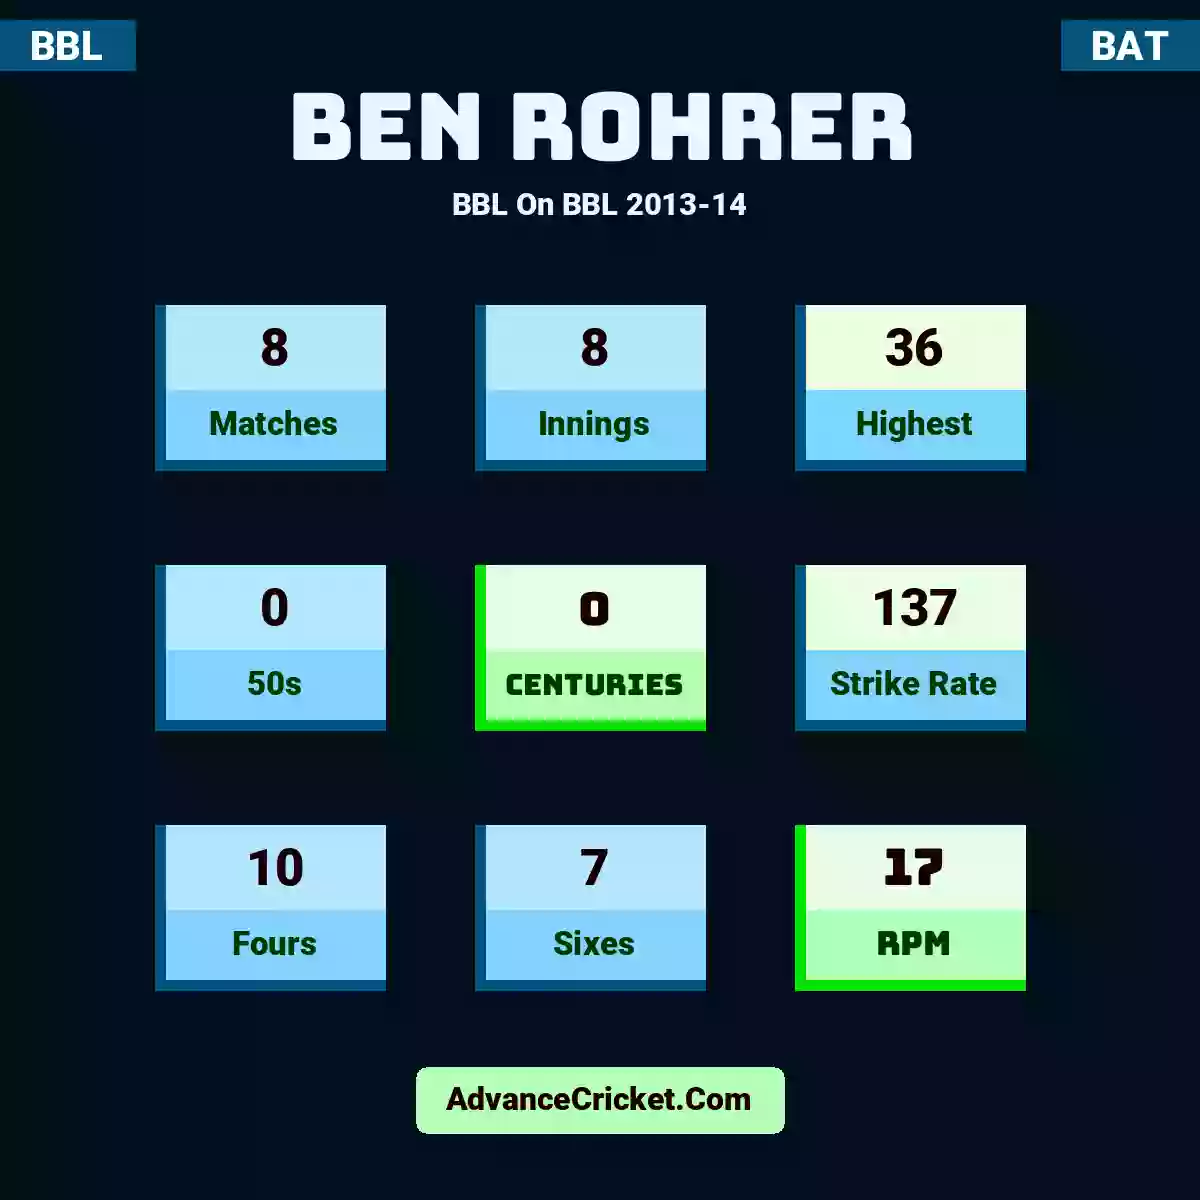 Ben Rohrer BBL  On BBL 2013-14, Ben Rohrer played 8 matches, scored 36 runs as highest, 0 half-centuries, and 0 centuries, with a strike rate of 137. B.Rohrer hit 10 fours and 7 sixes, with an RPM of 17.